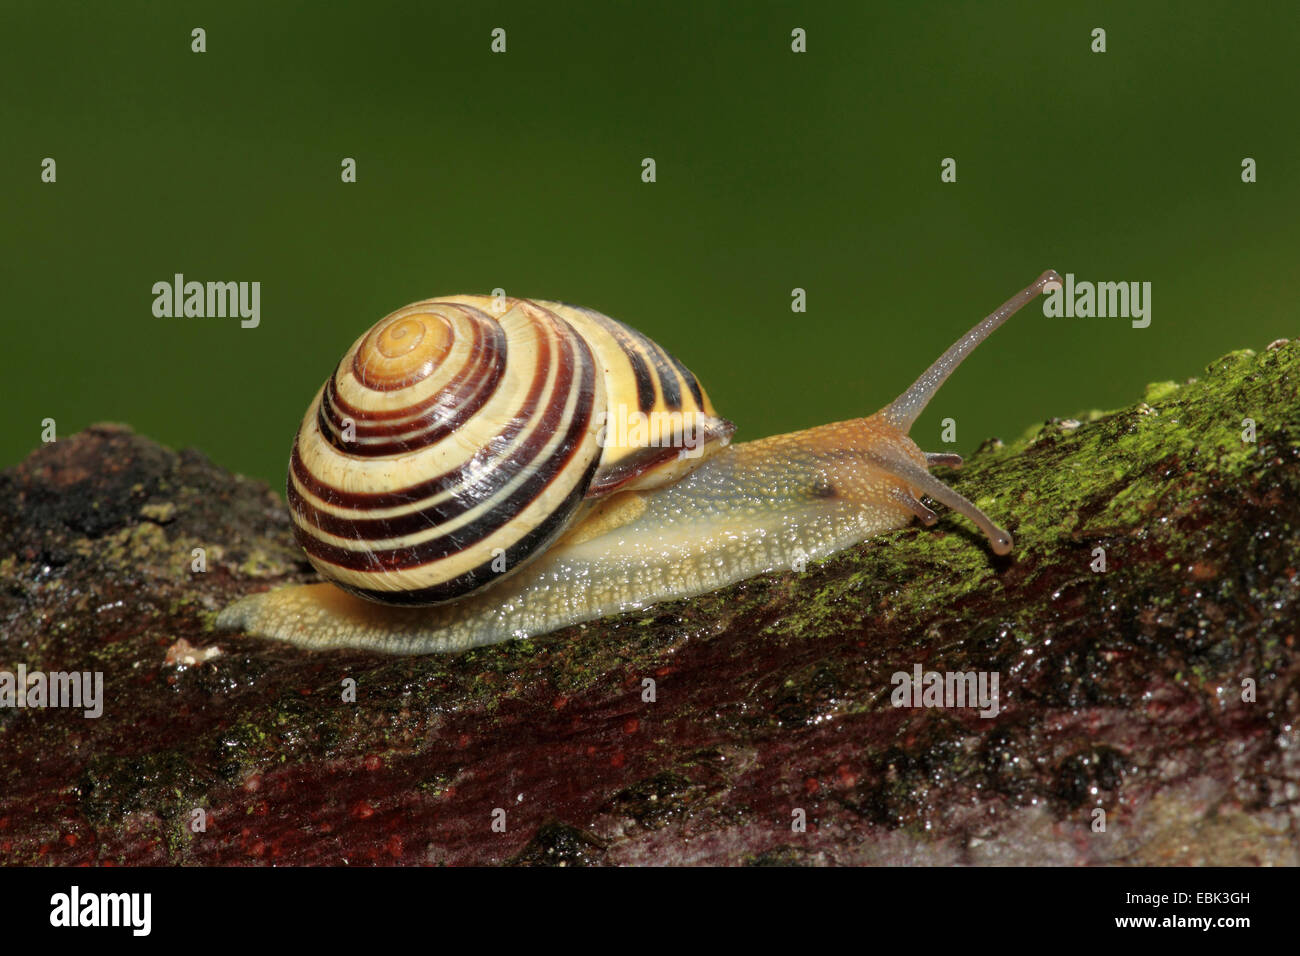 brown-lipped snail, grove snail, grovesnail, English garden snail, larger banded snail, banded wood snail (Cepaea nemoralis), creeping on lichened wood, Germany Stock Photo